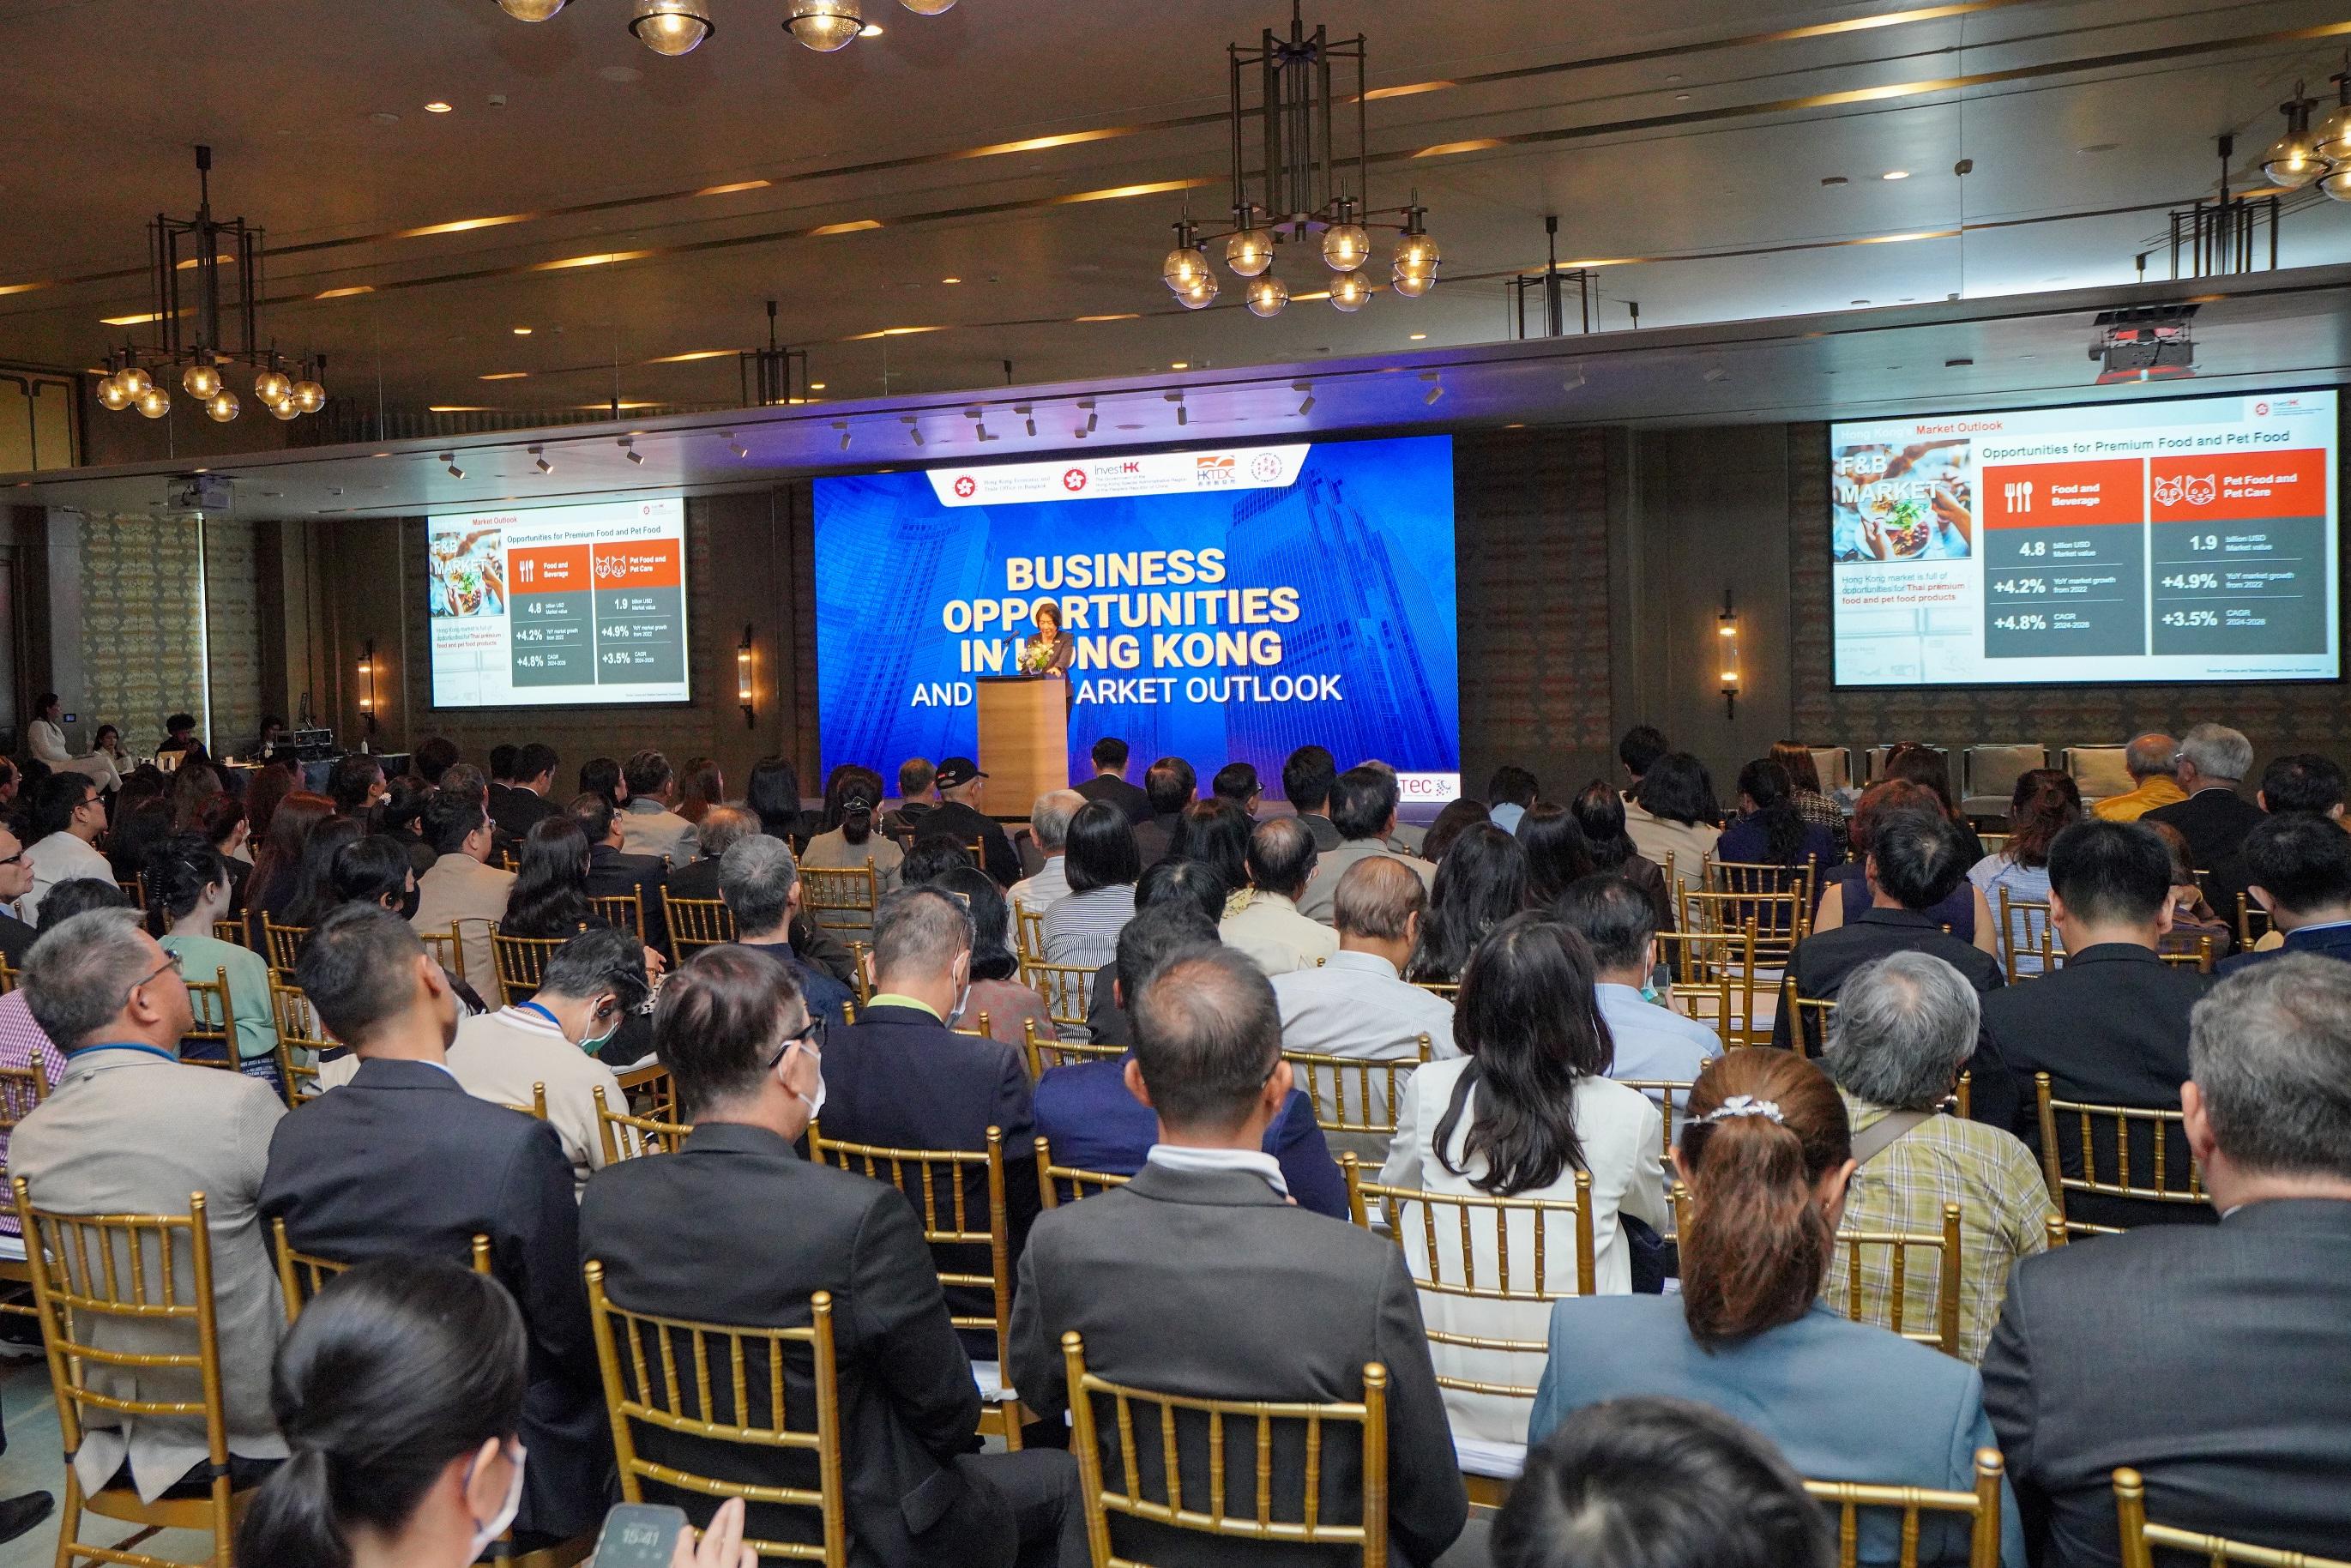 The Hong Kong Economic and Trade Office in Bangkok jointly organised the Thailand-Hong Kong Business Forum with Invest Hong Kong and the Hong Kong Trade Development Council in Bangkok today (March 18) to promote Hong Kong's business opportunities.